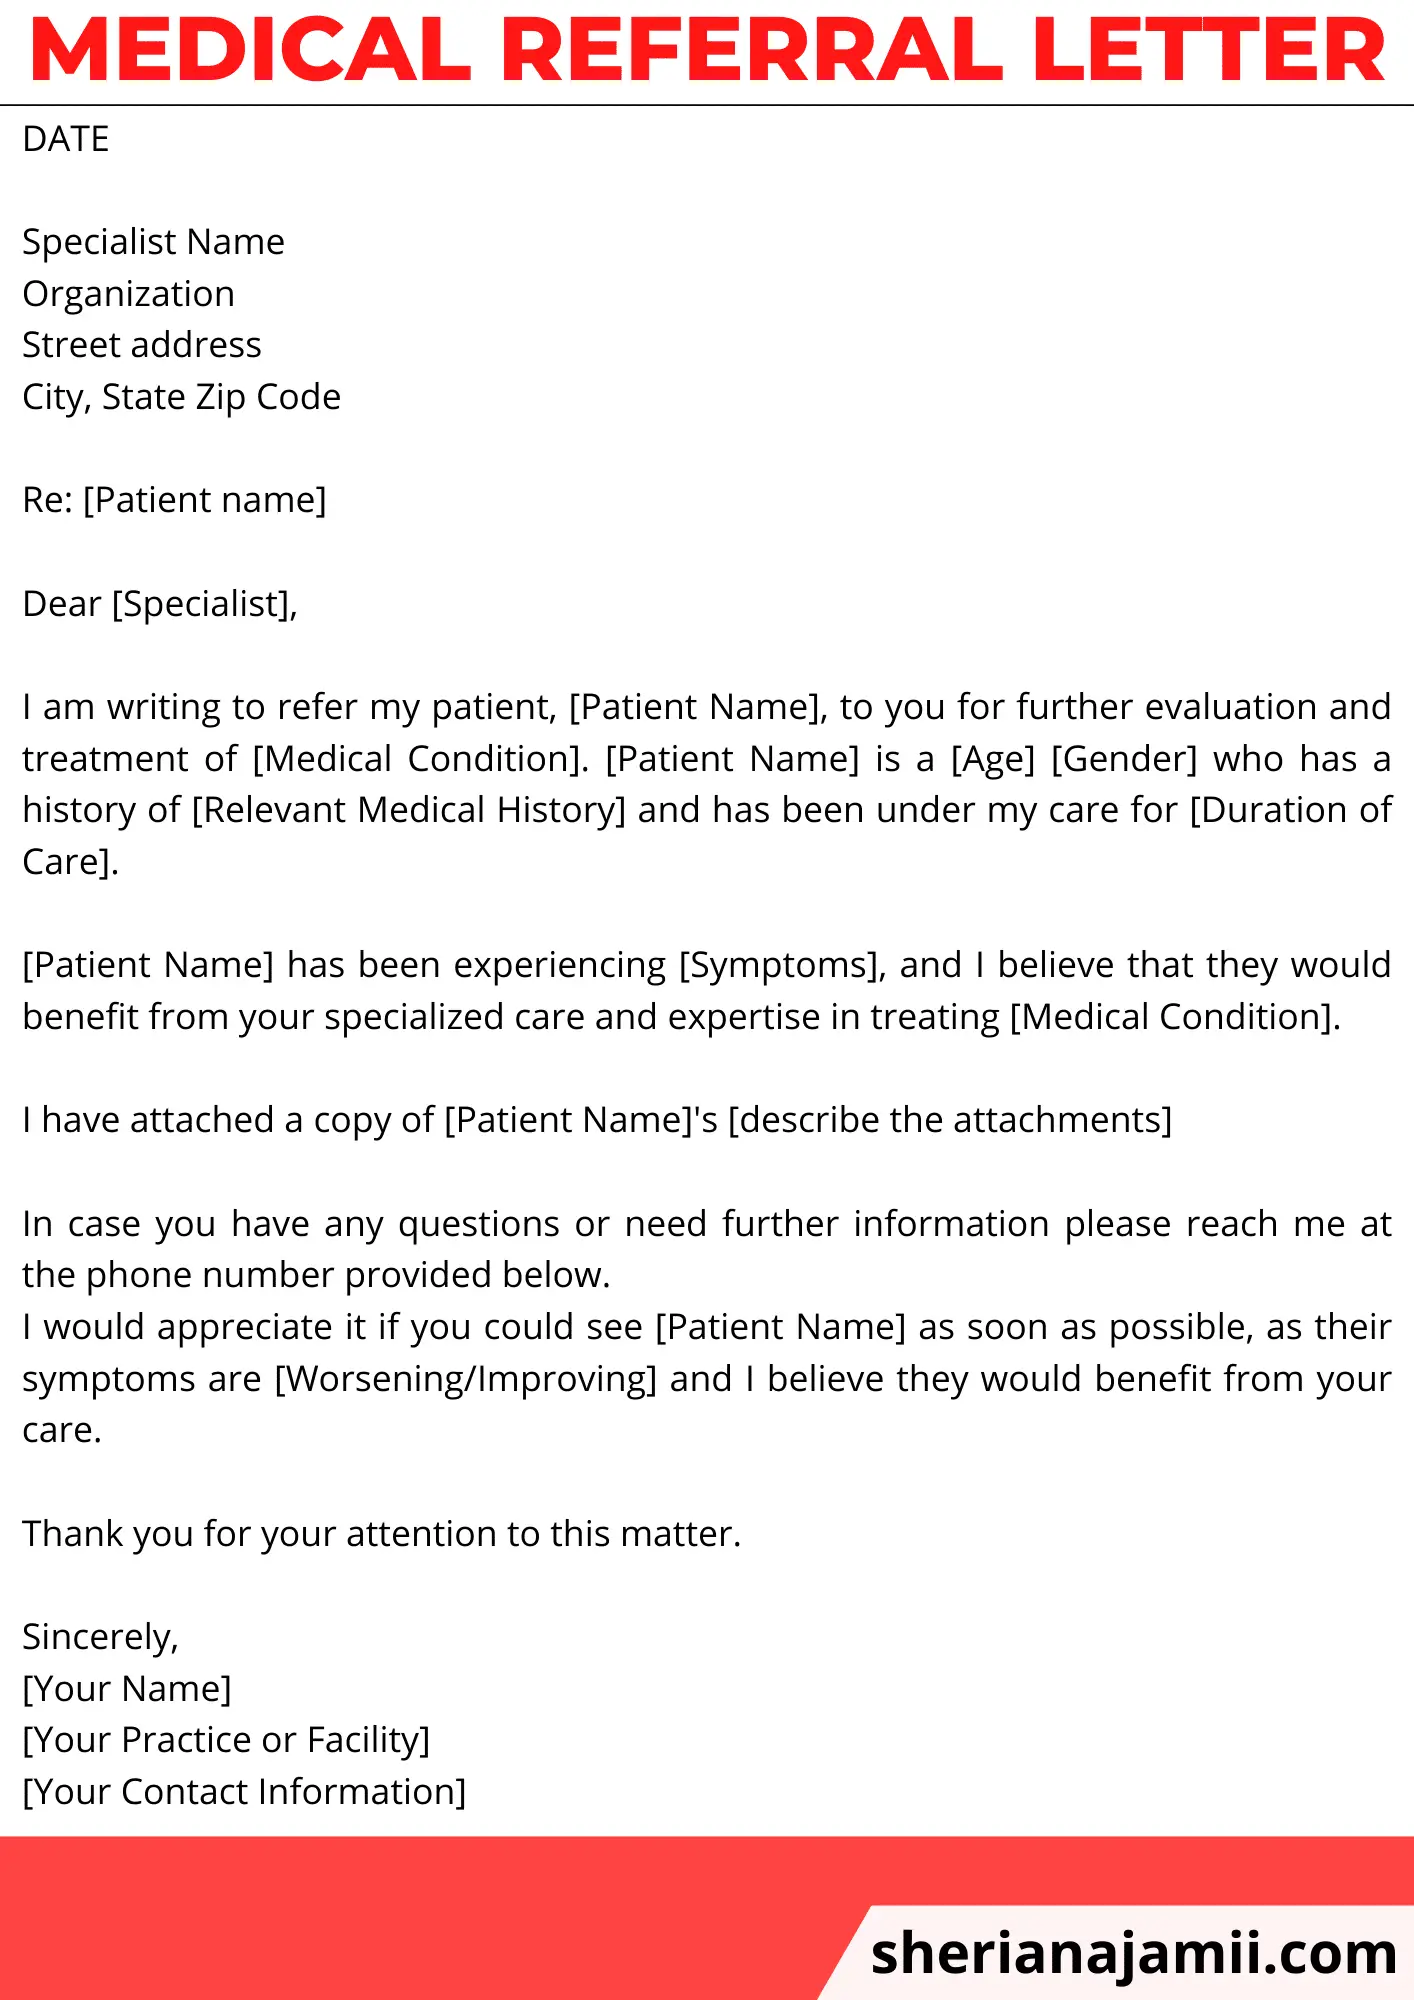 Medical referral letter, Medical referral letter template, Medical referral letter sample, Medical referral letter example